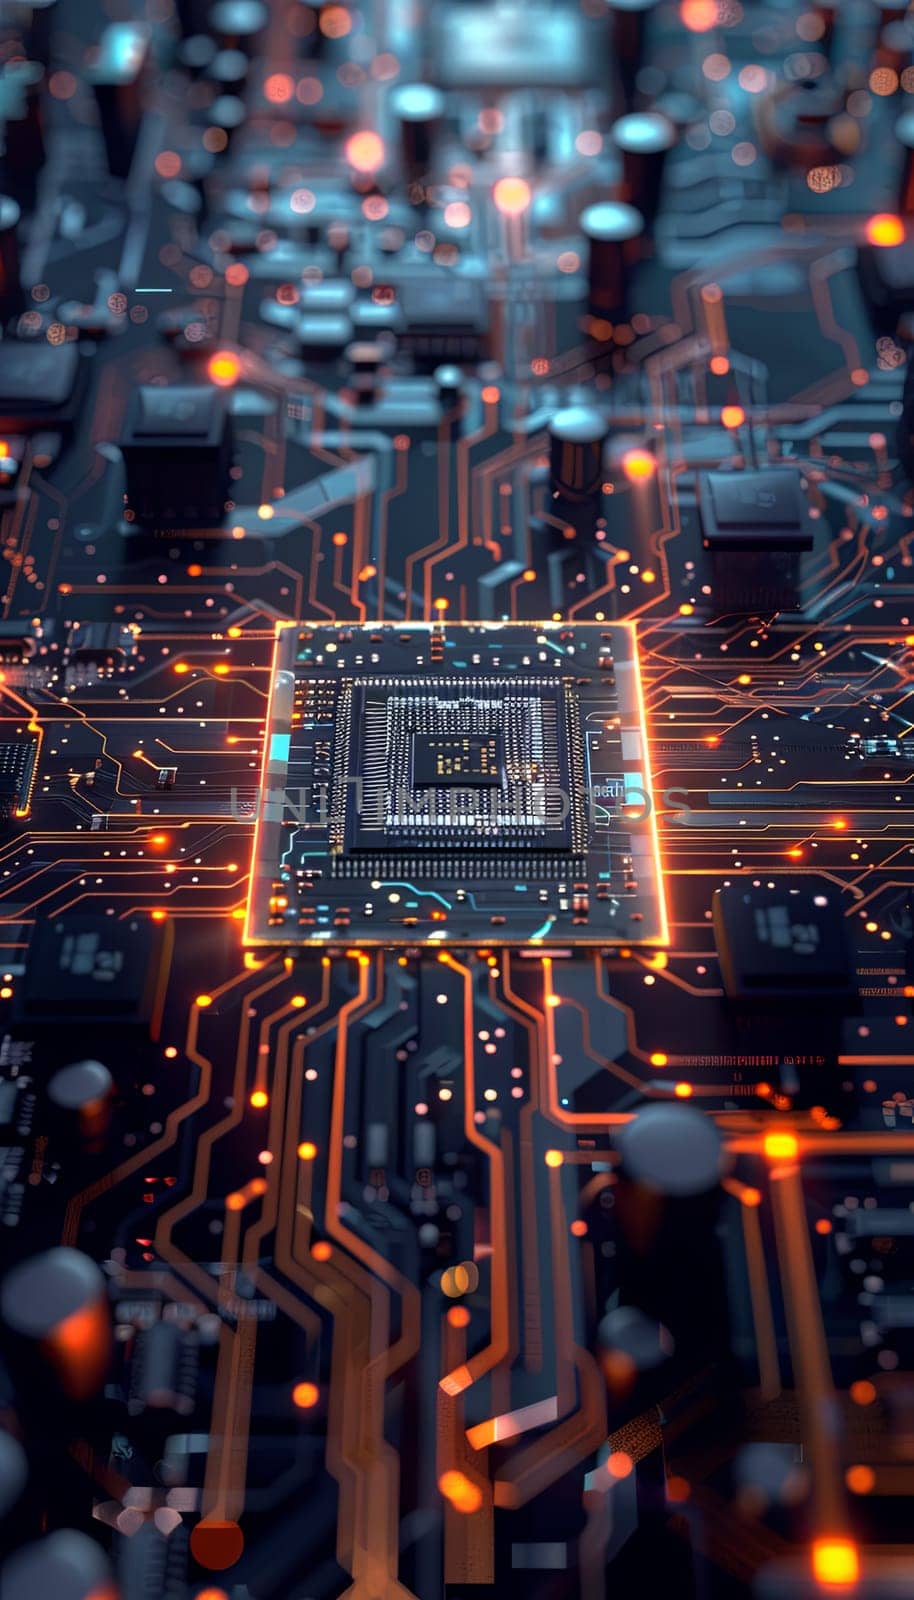 A close-up image of a modern microprocessor on a motherboard, surrounded by intricate digital data streams and glowing light effects, symbolizing the processing power of AI.